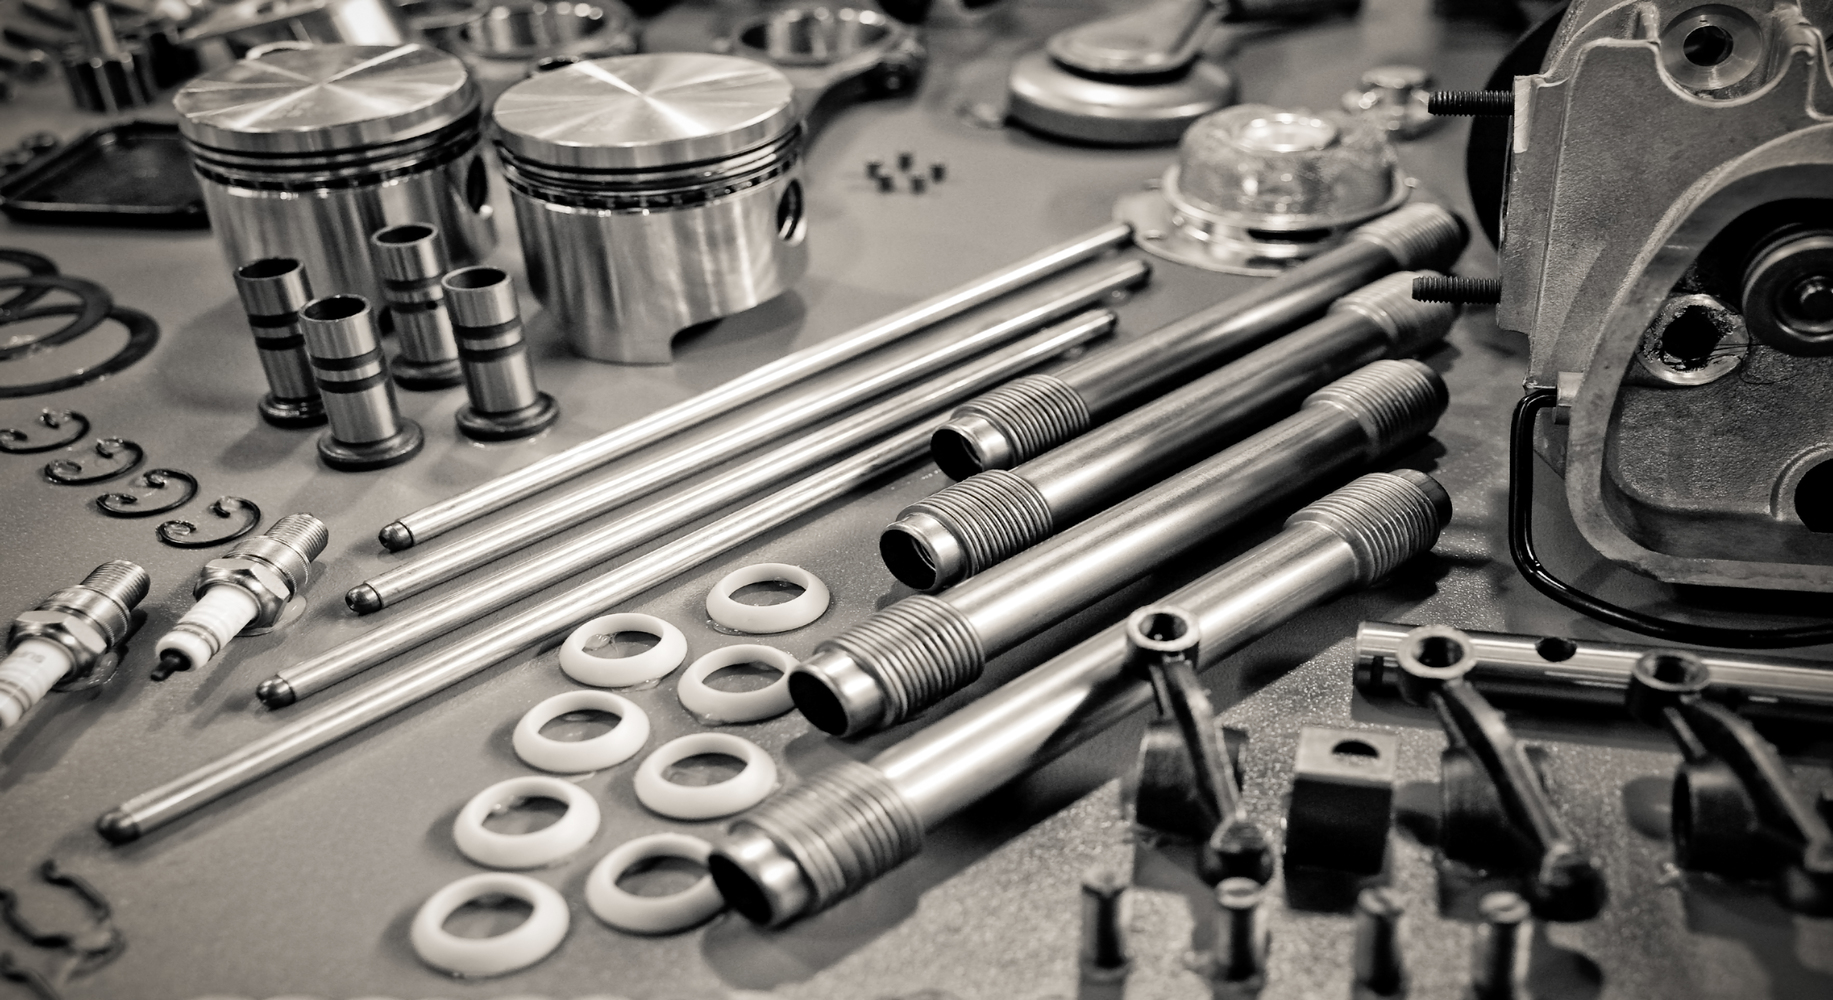 Equipment/ Component manufacturing